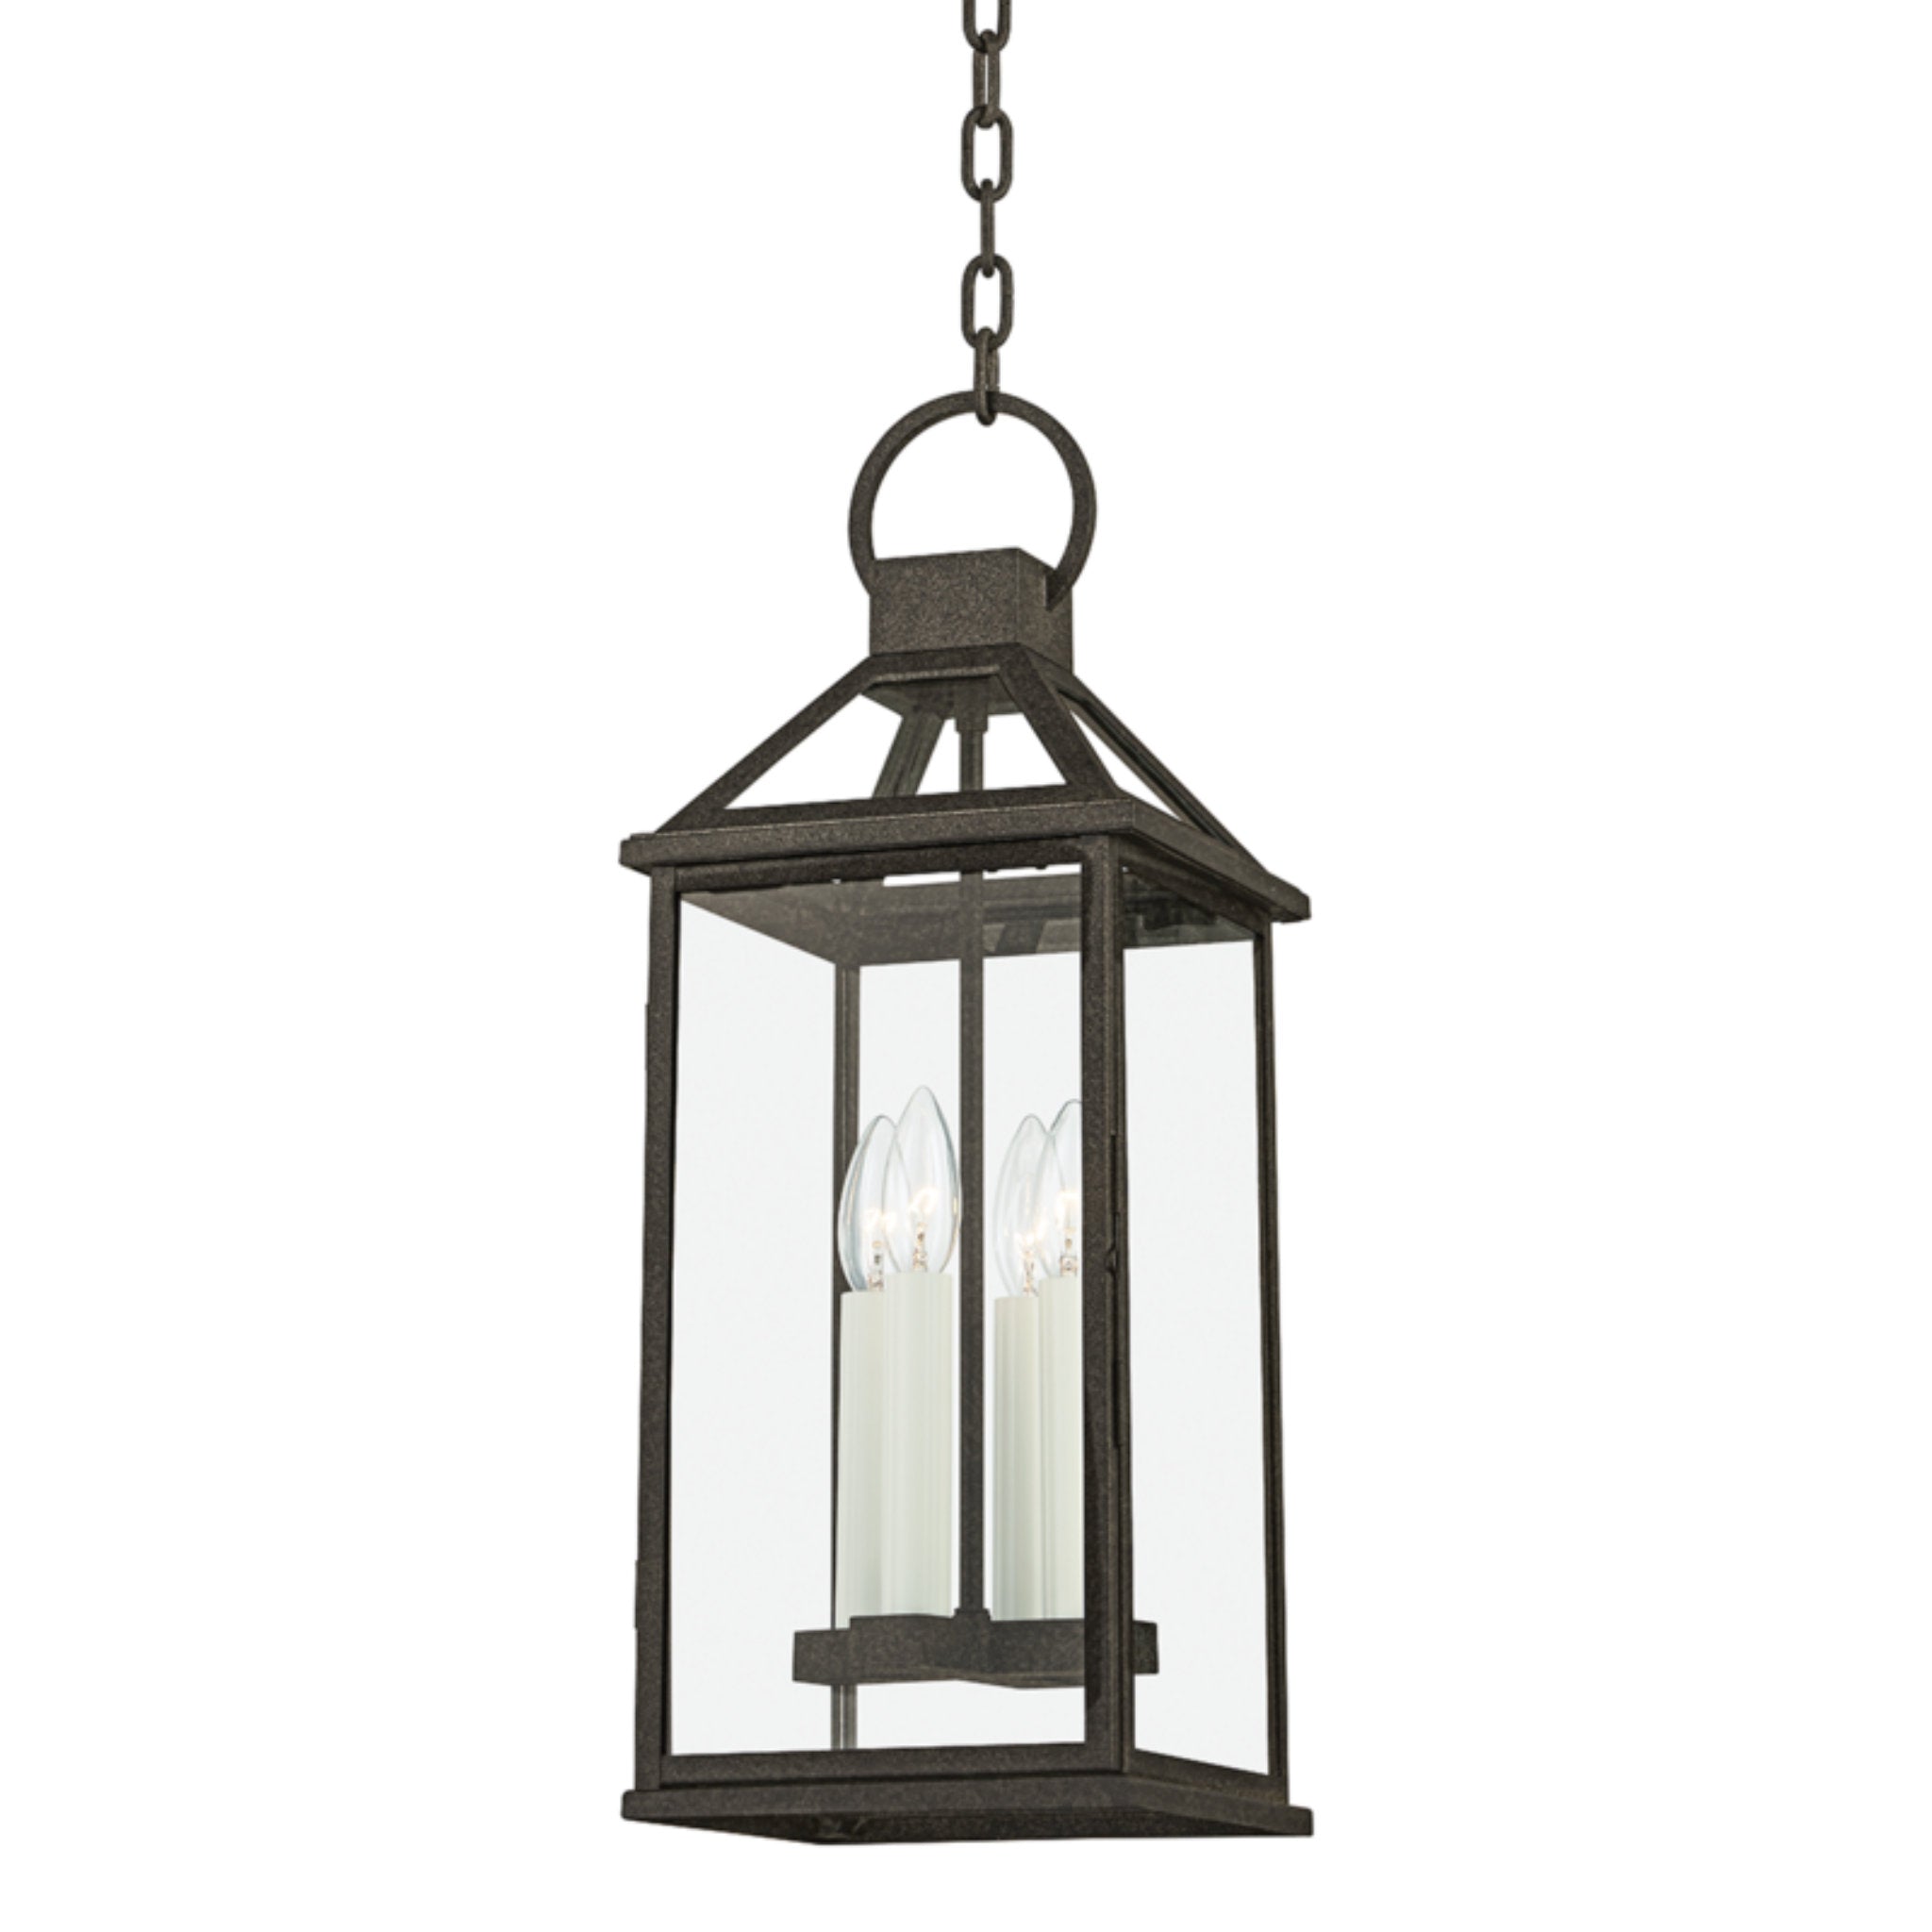 Sanders 4 Light Lantern in French Iron by Becki Owens